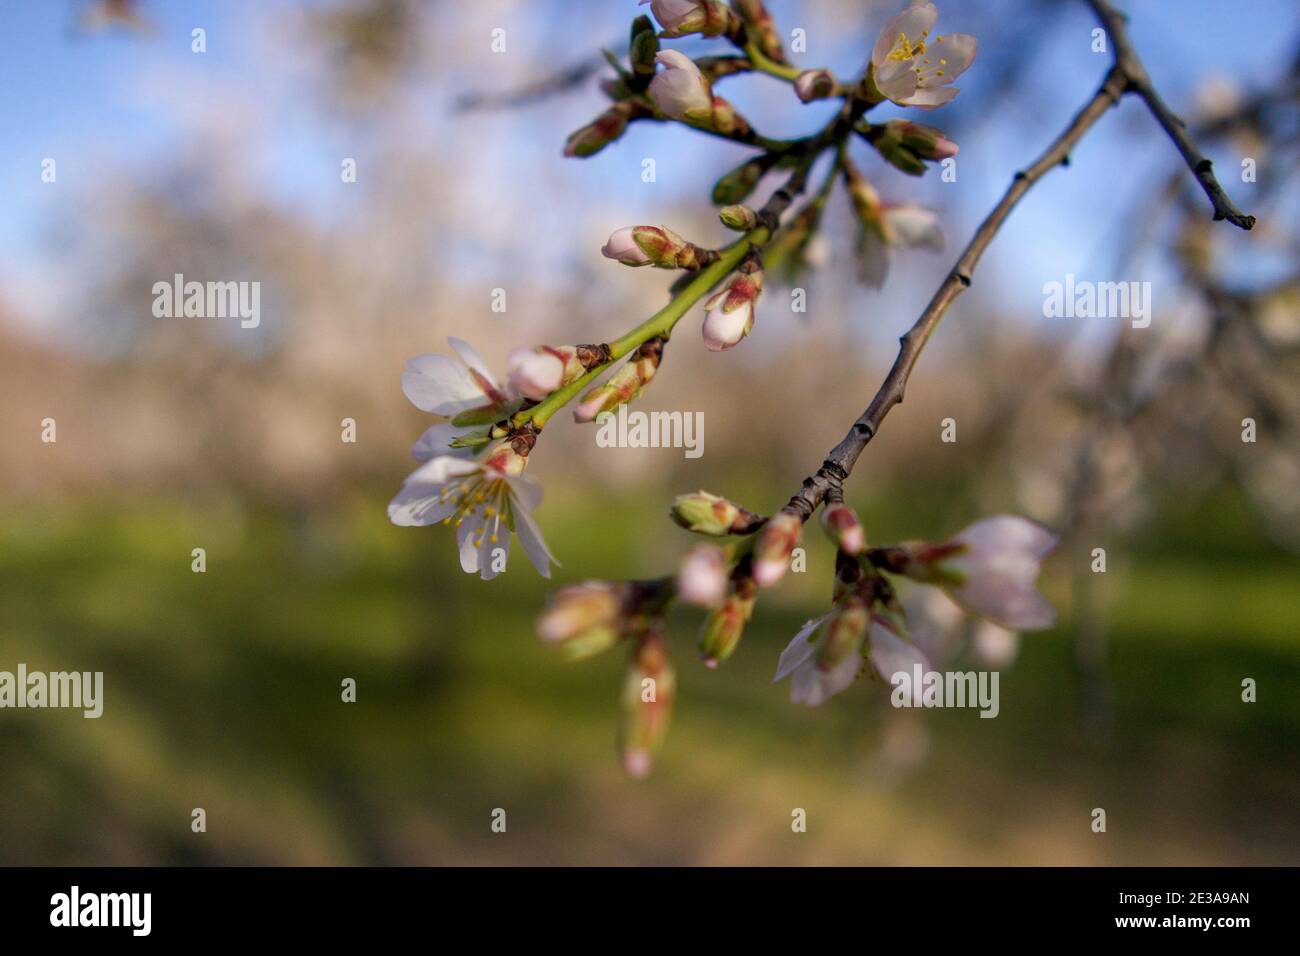 Almond blossoms at Parque Quinta de los Molinos in Madrid. Close-up of delicate flower buds and twigs. Stock Photo